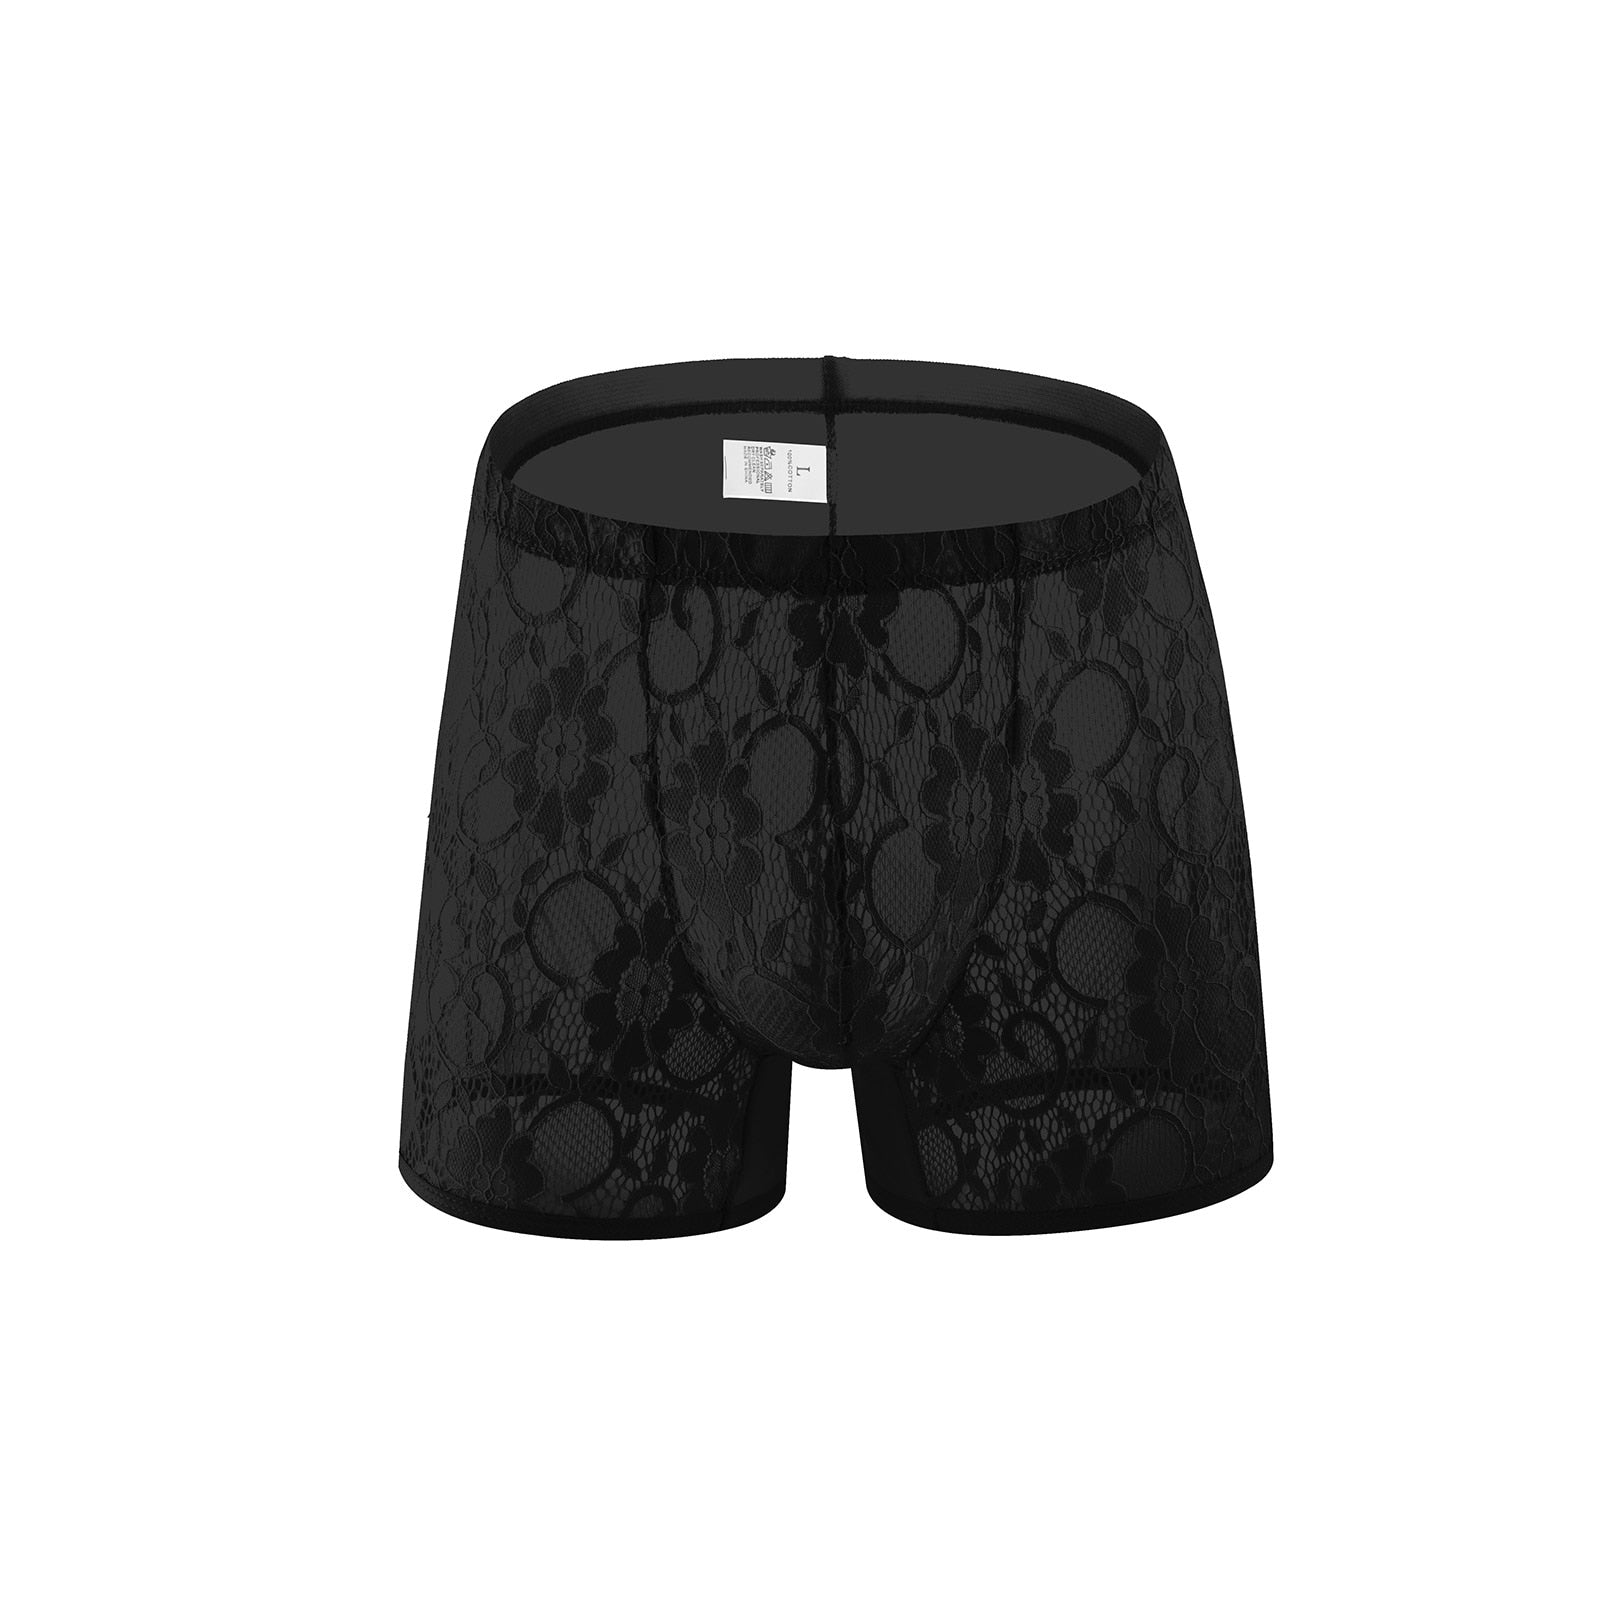 SHEER Lace Boxers